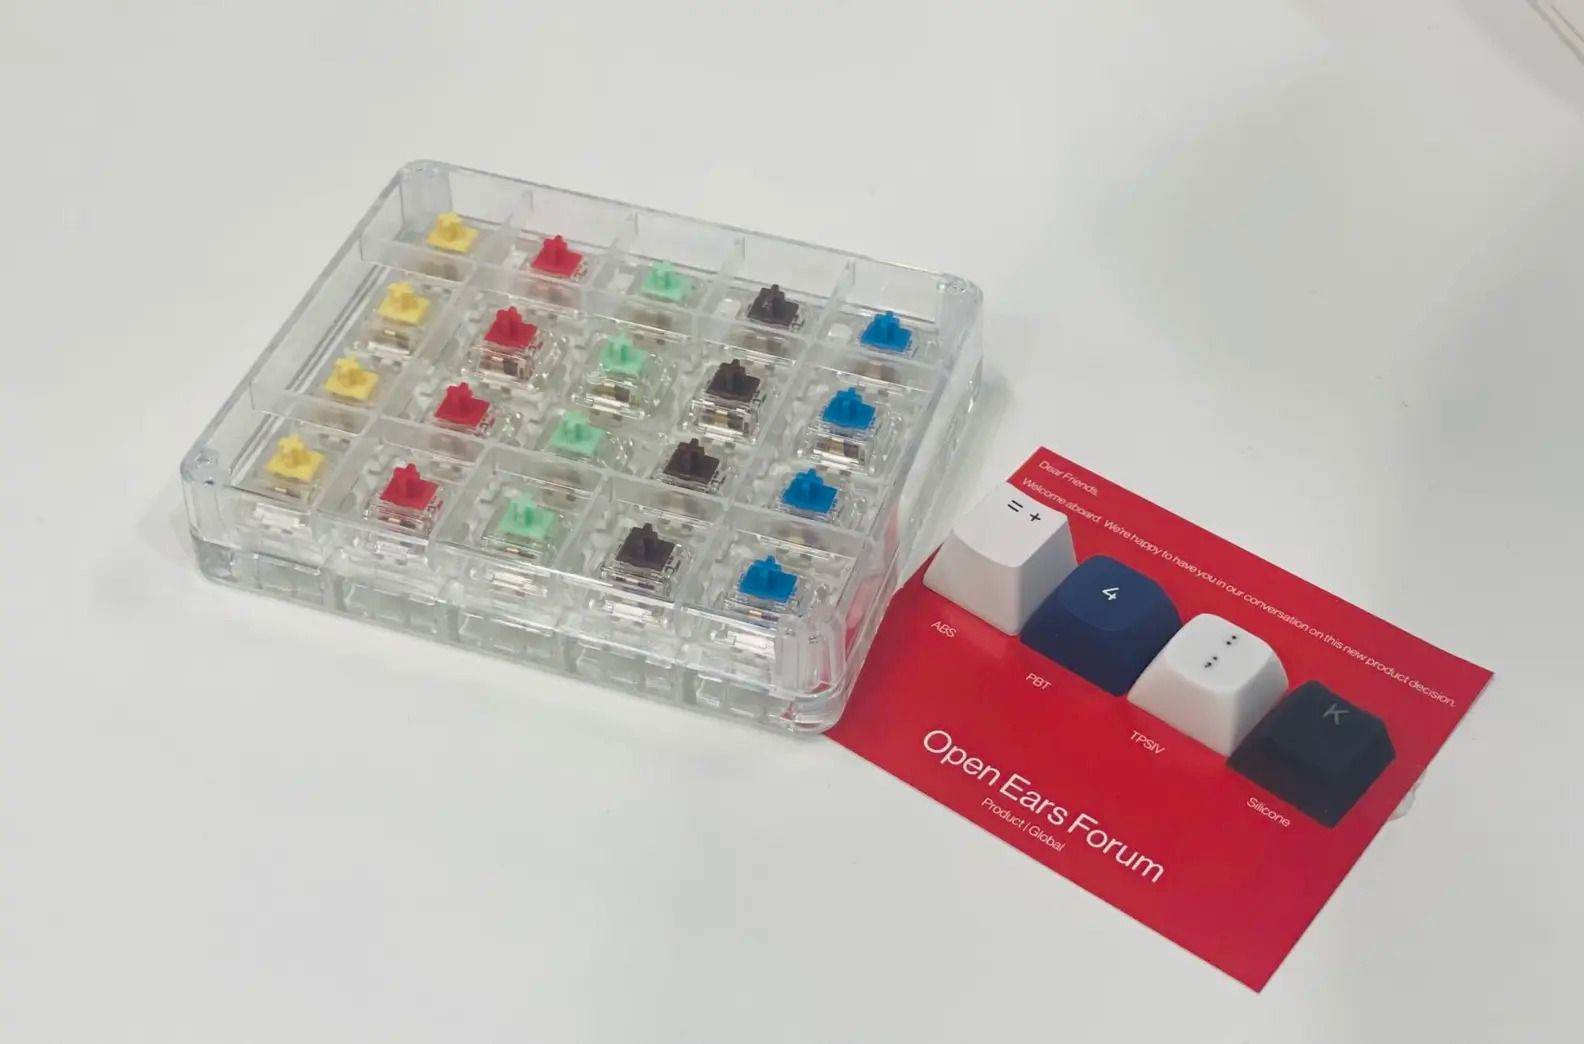 OnePlus Open Ears Forum card with various keycaps next to a mechanical keyboard switch tester pack.